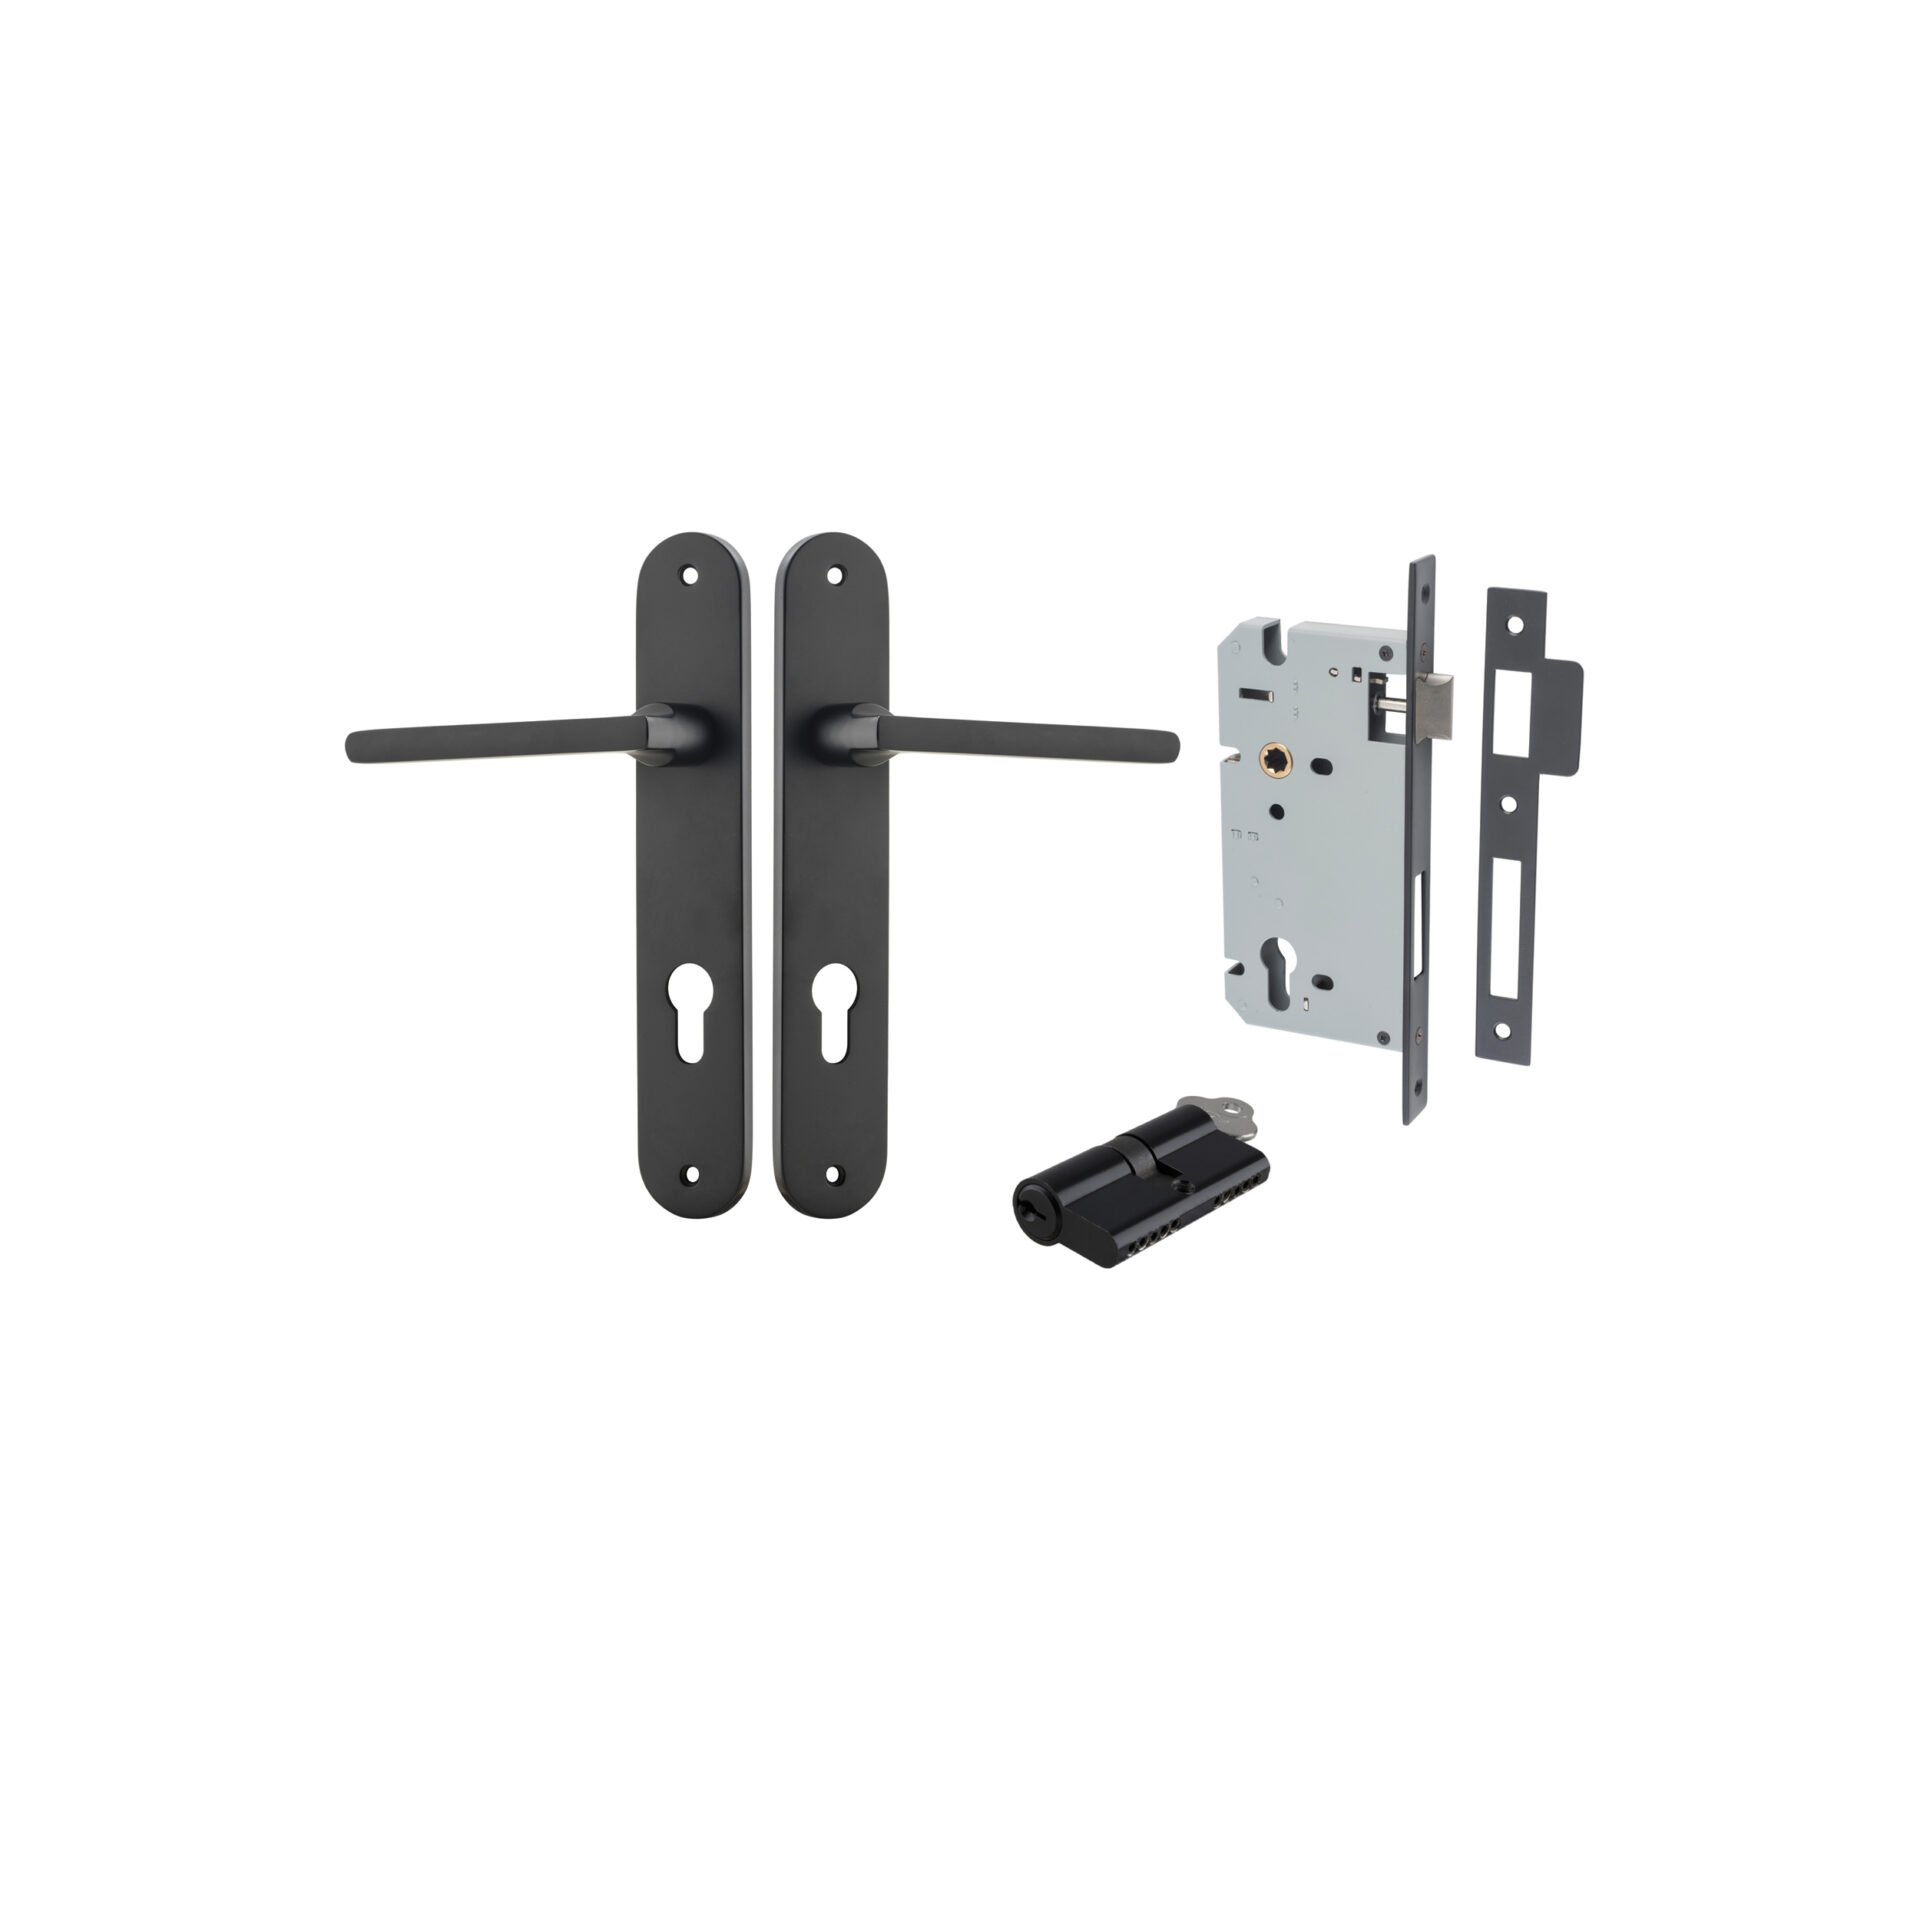 Baltimore Lever - Oval Backplate Entrance Kit with High Security Lock